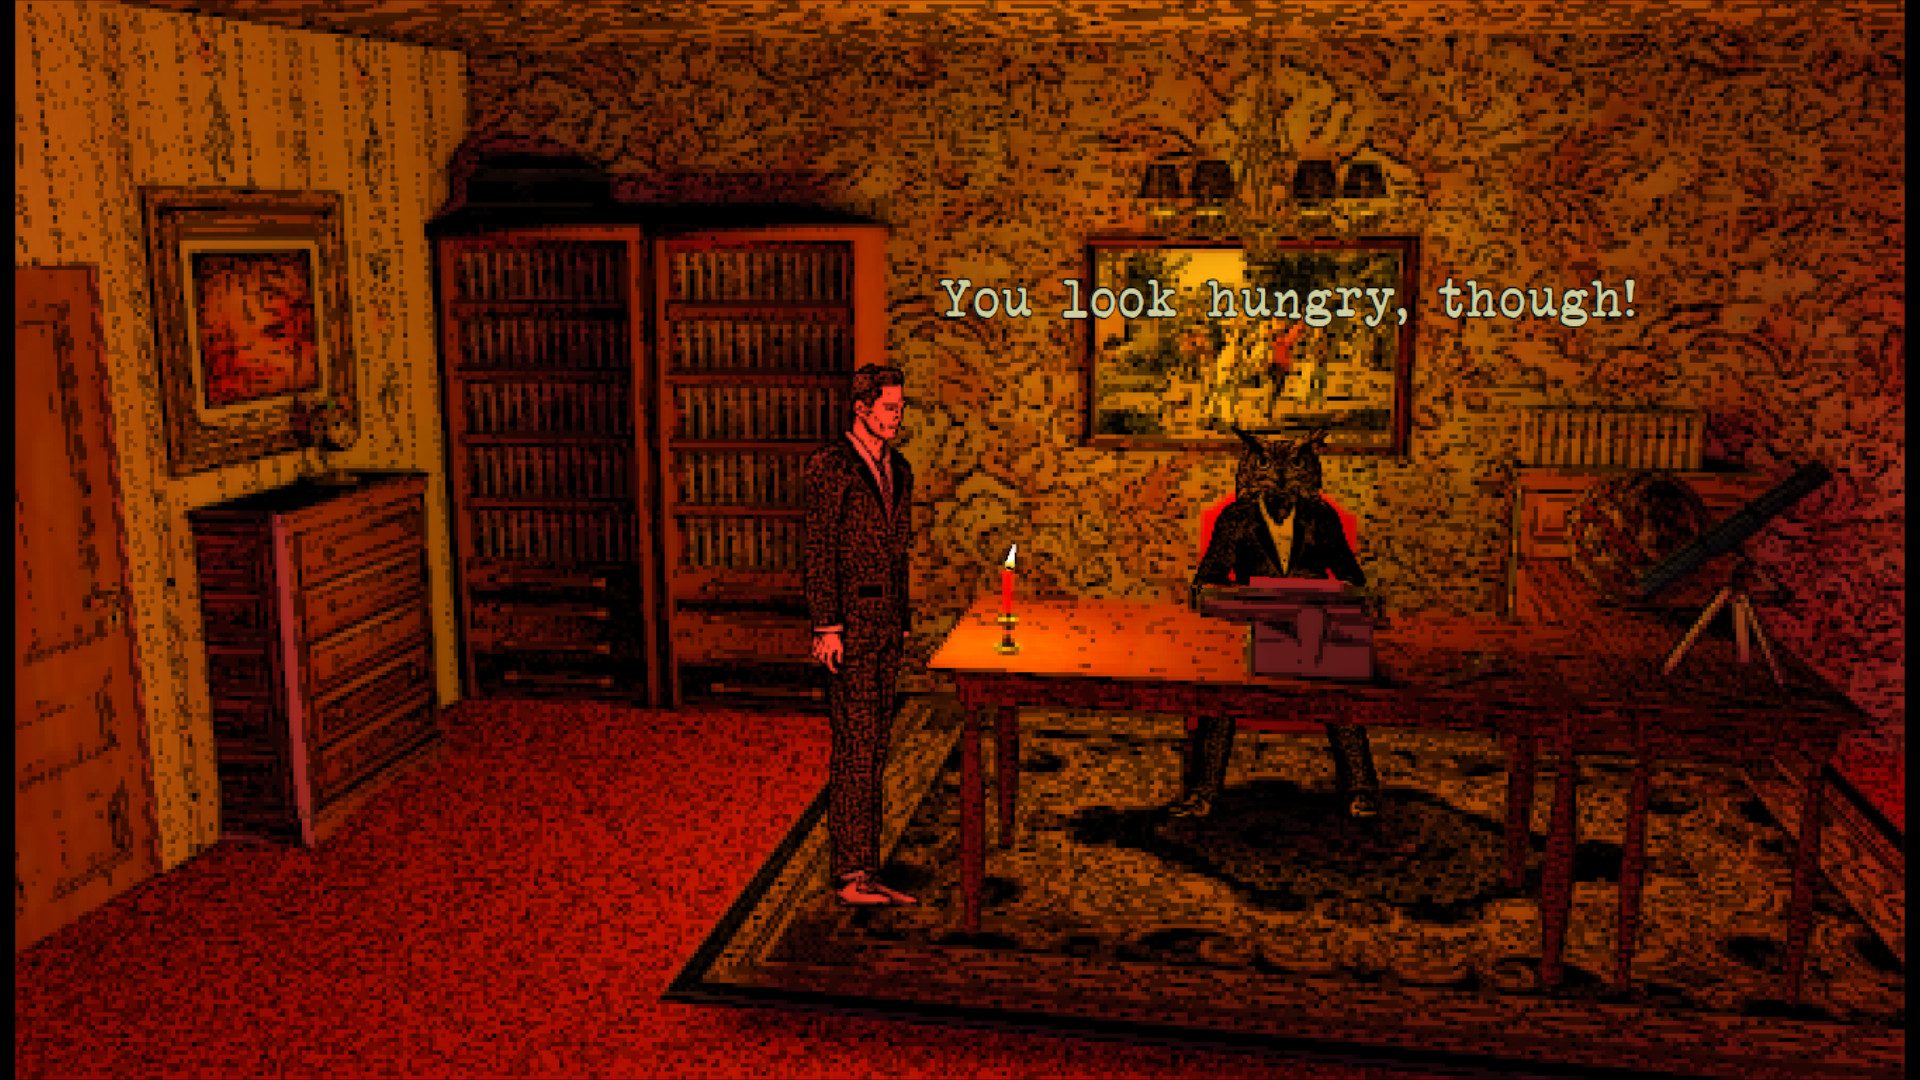 Free Steam games - Dinner With An Owl - A man stands in an office next to an anthropomorphic owl character sitting at a desk who says "You look hungry, though!"